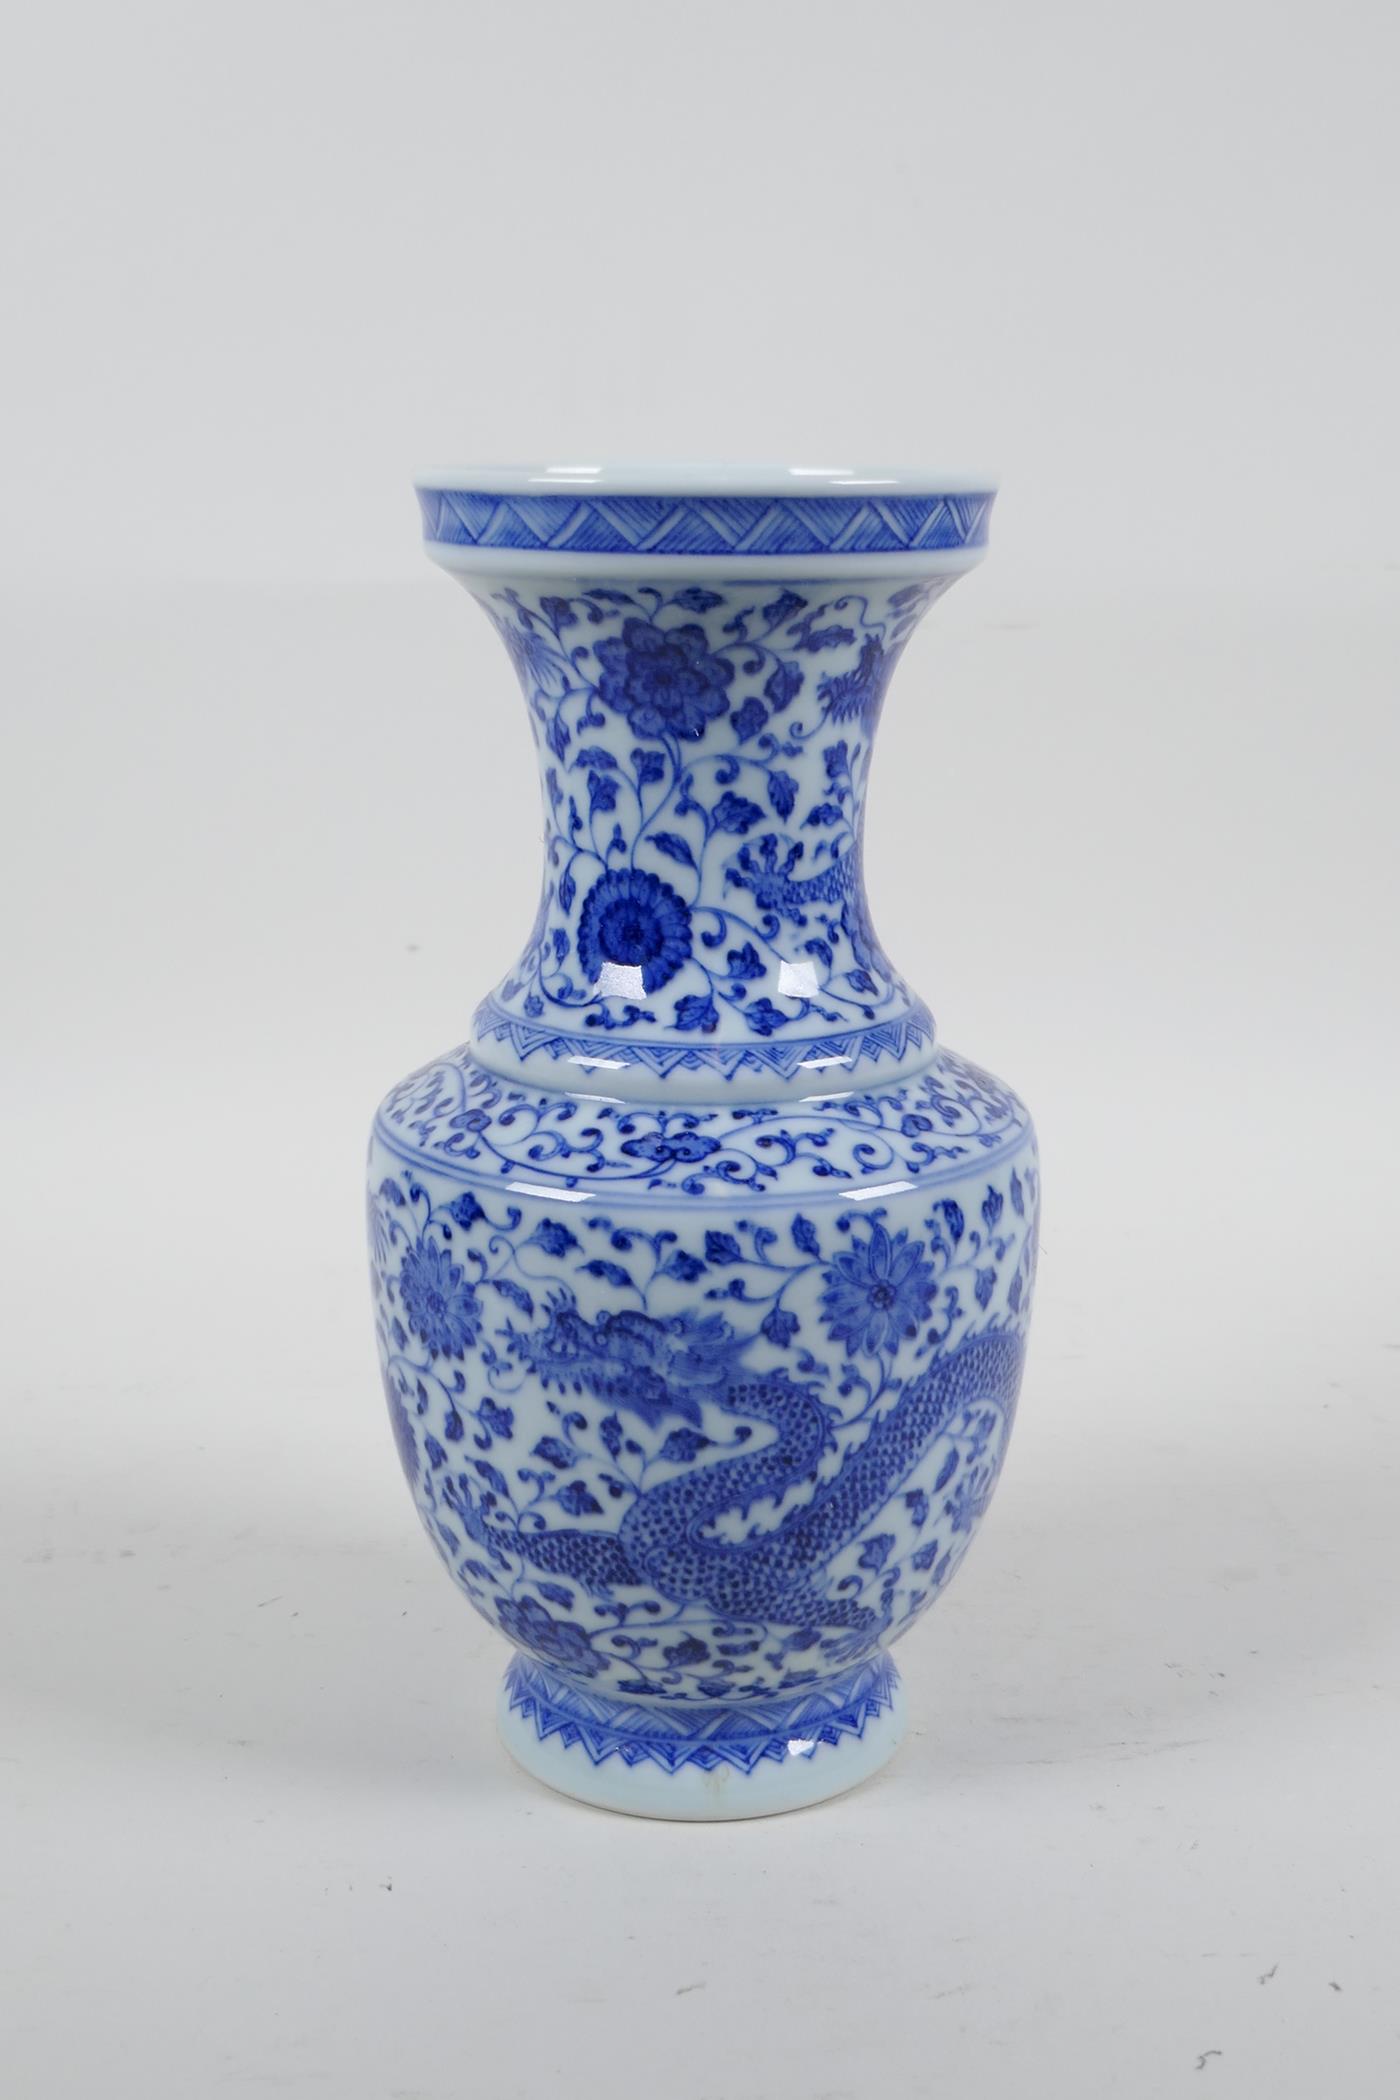 A Chinese blue and white porcelain vase with dragon and lotus flower decoration, seal mark to